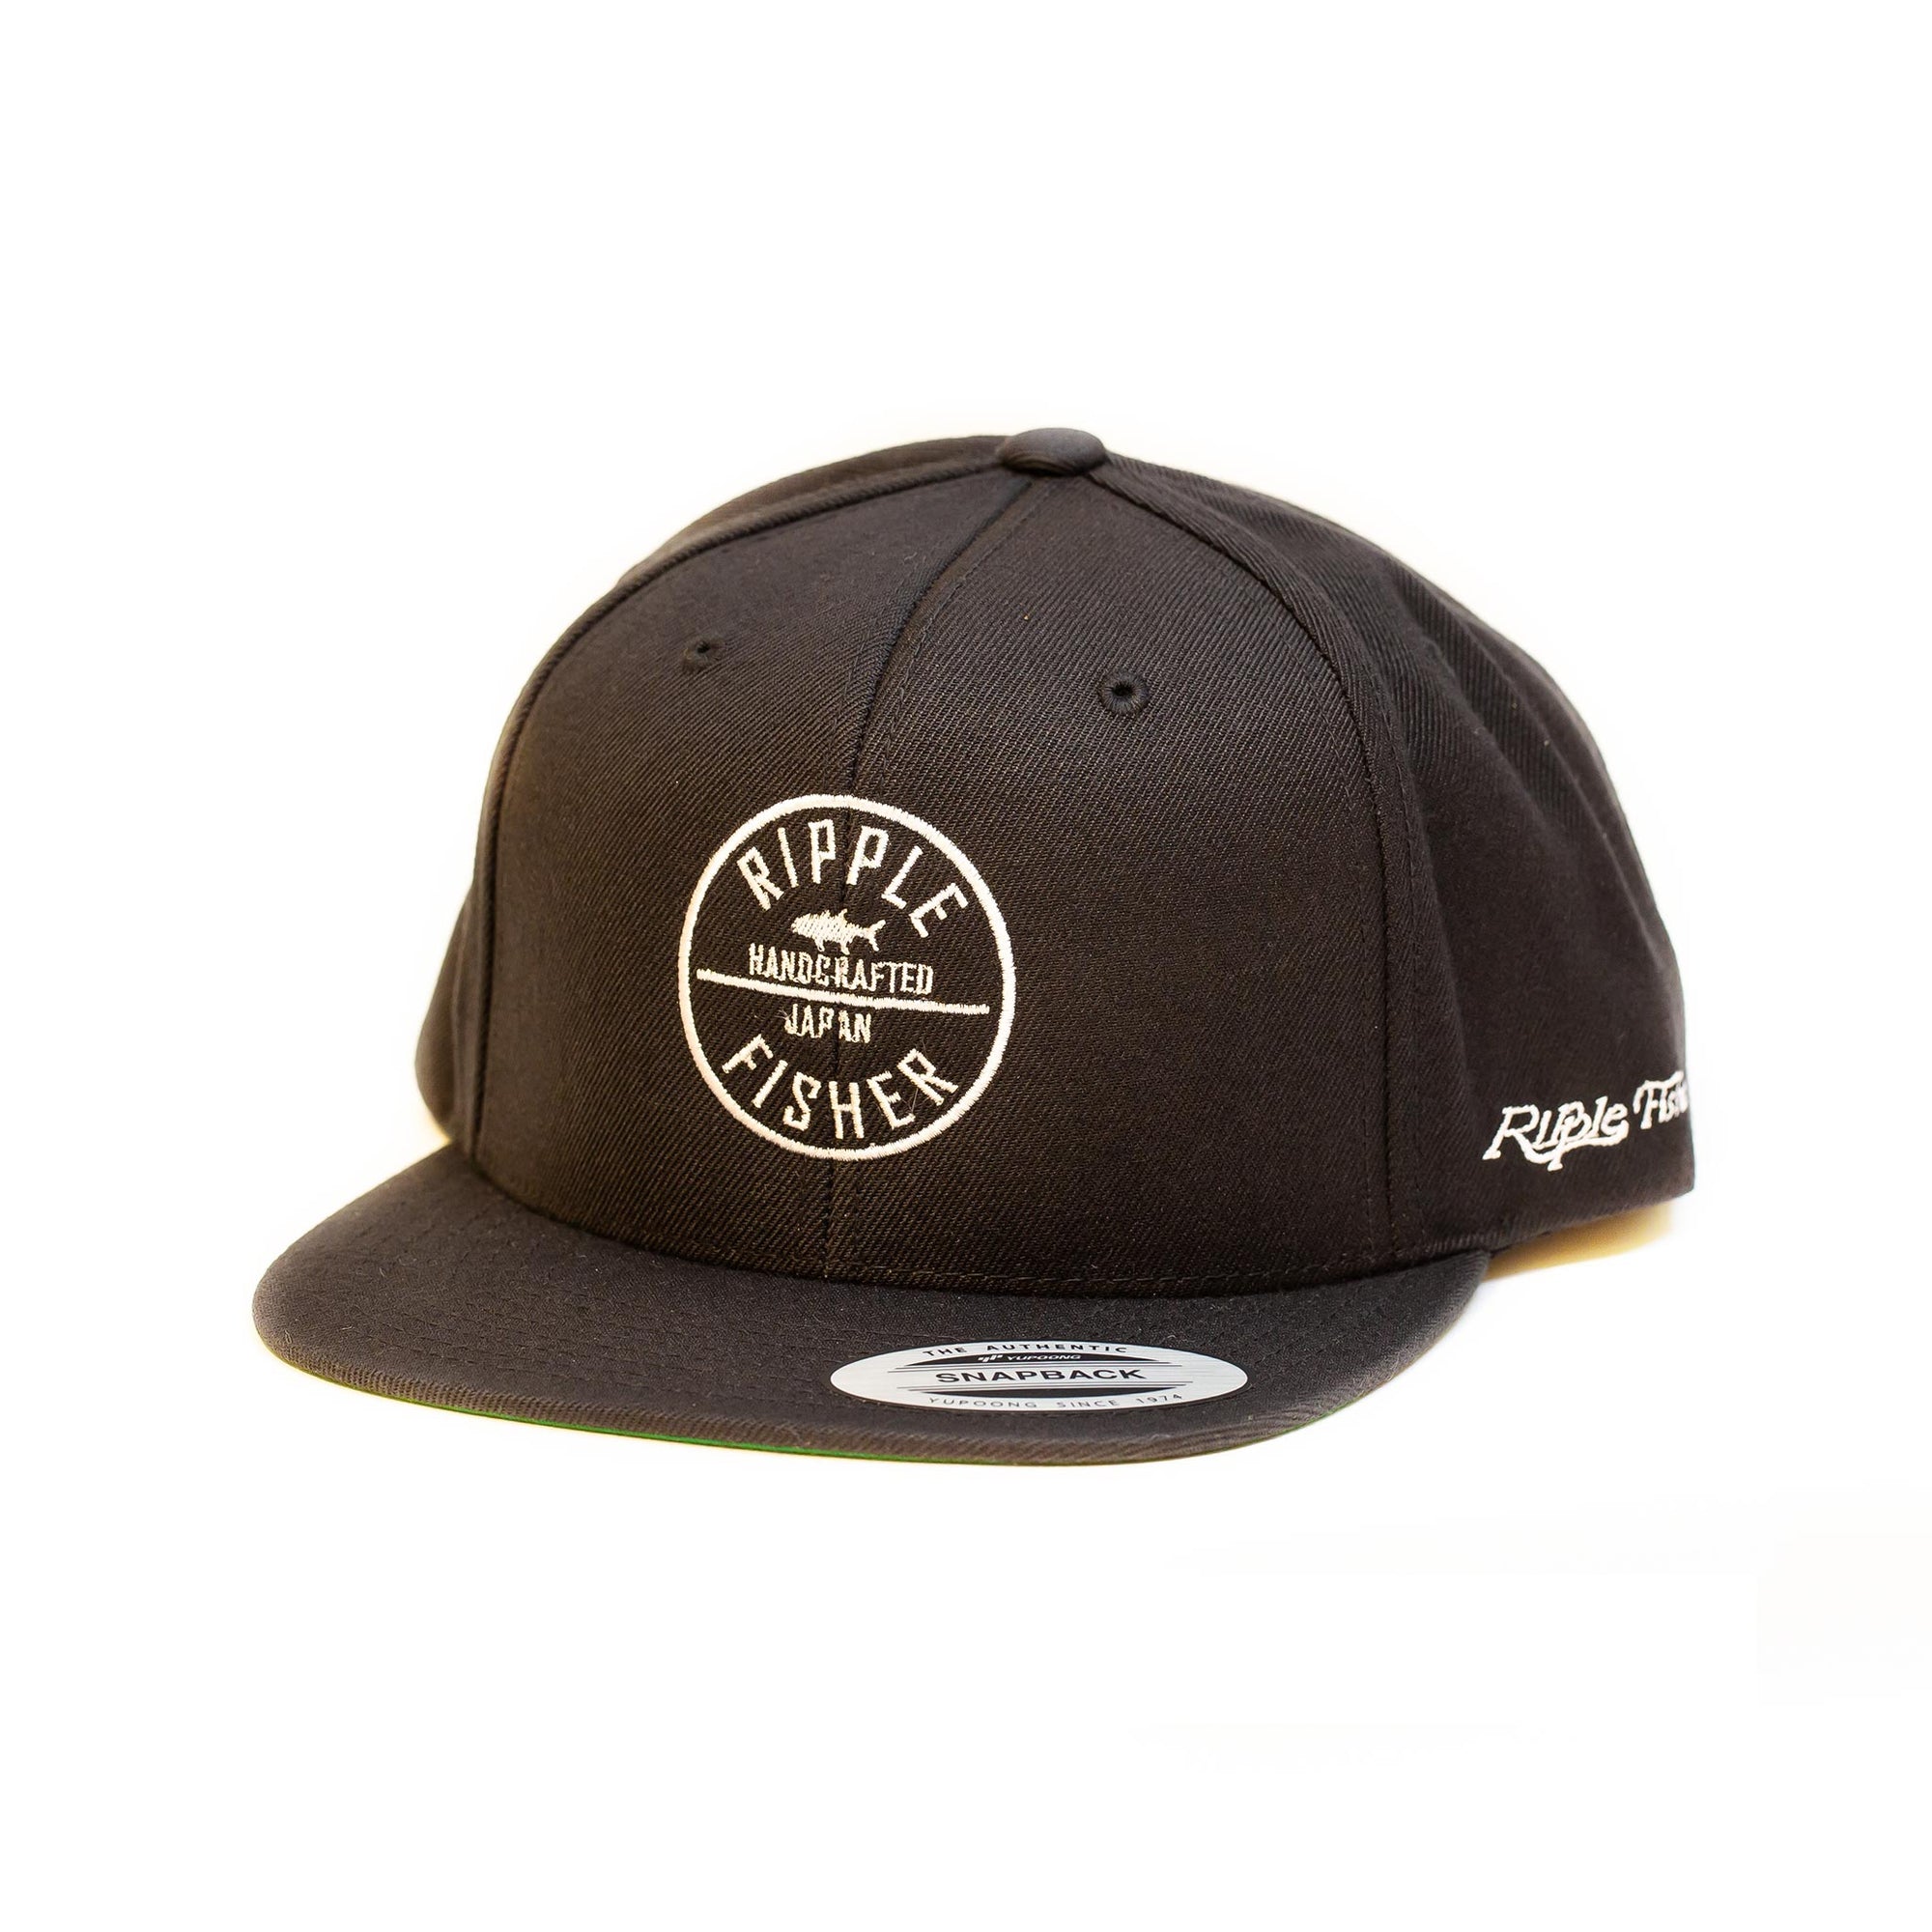 Ripple Fisher Snapback Black Patch Cap - Compleat Angler Nedlands